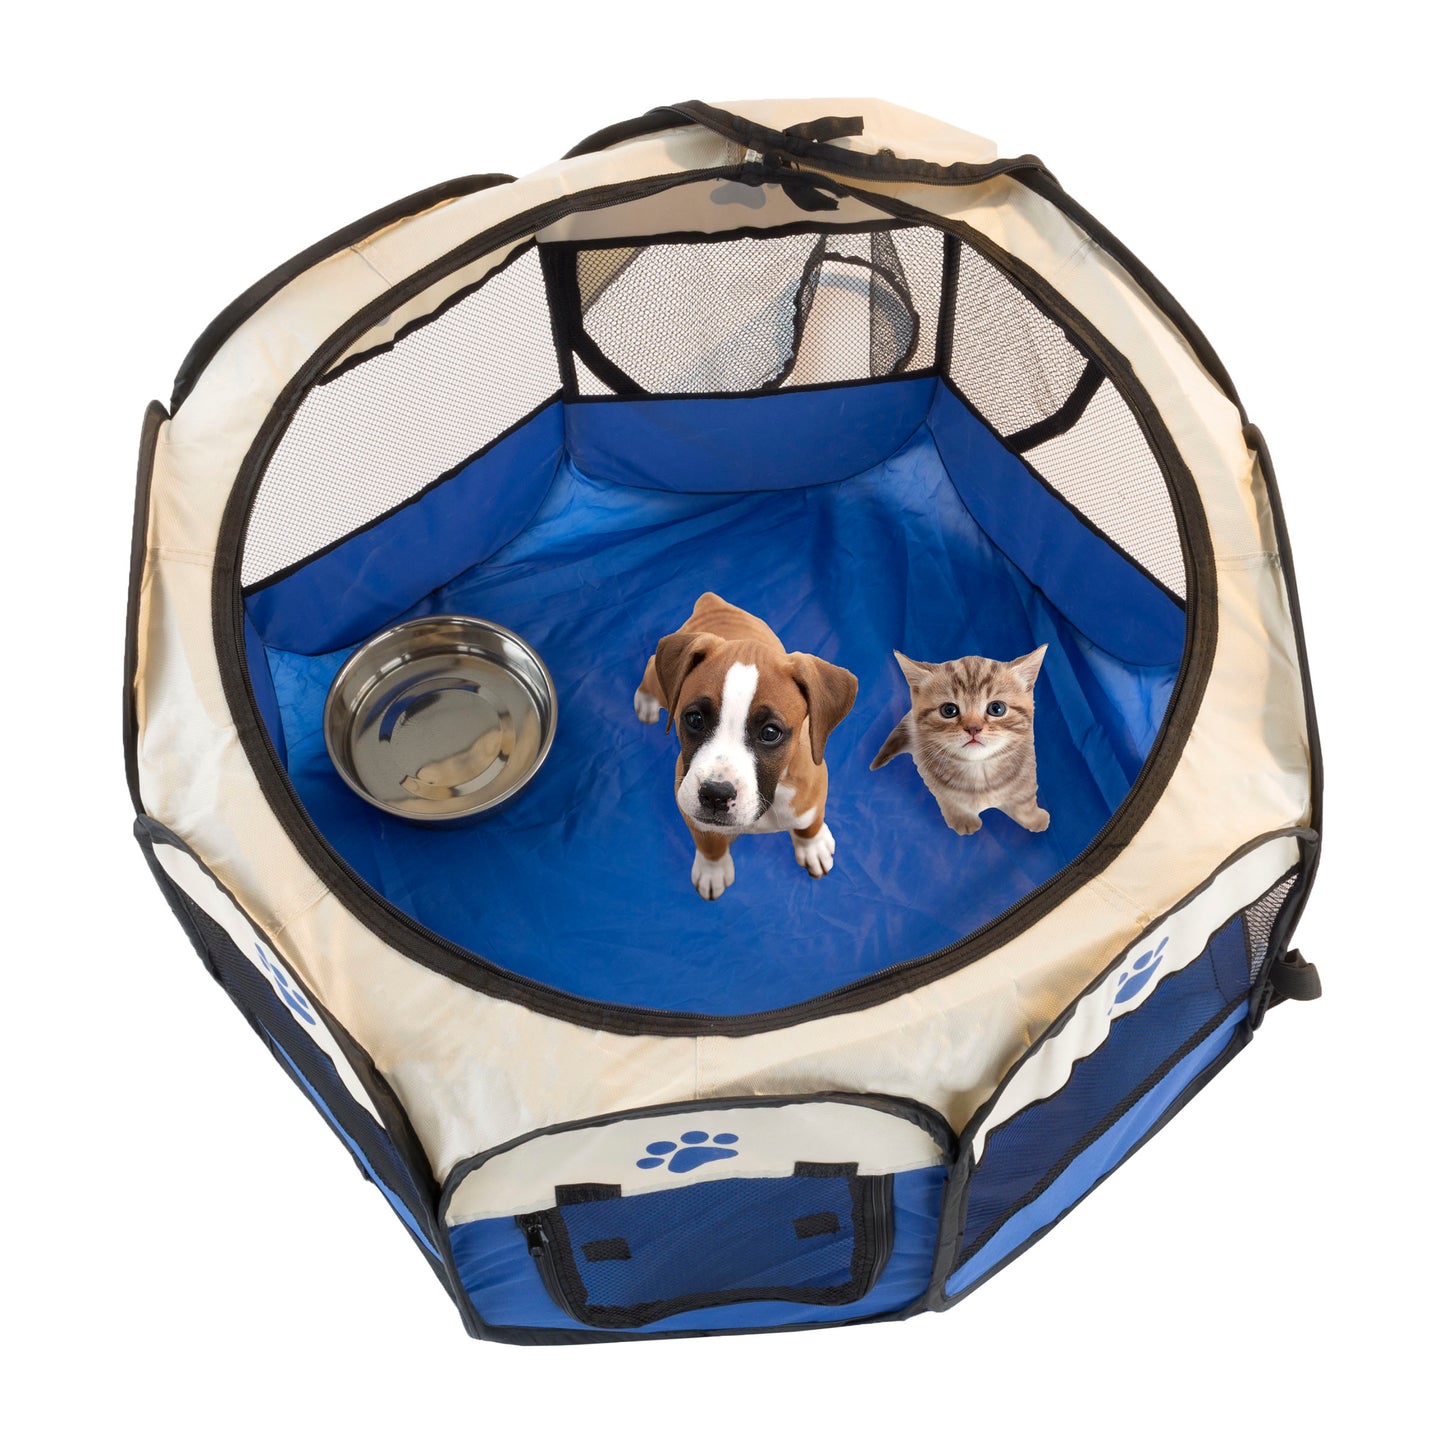 Pop-Up Puppy Playpen and Cat Tent